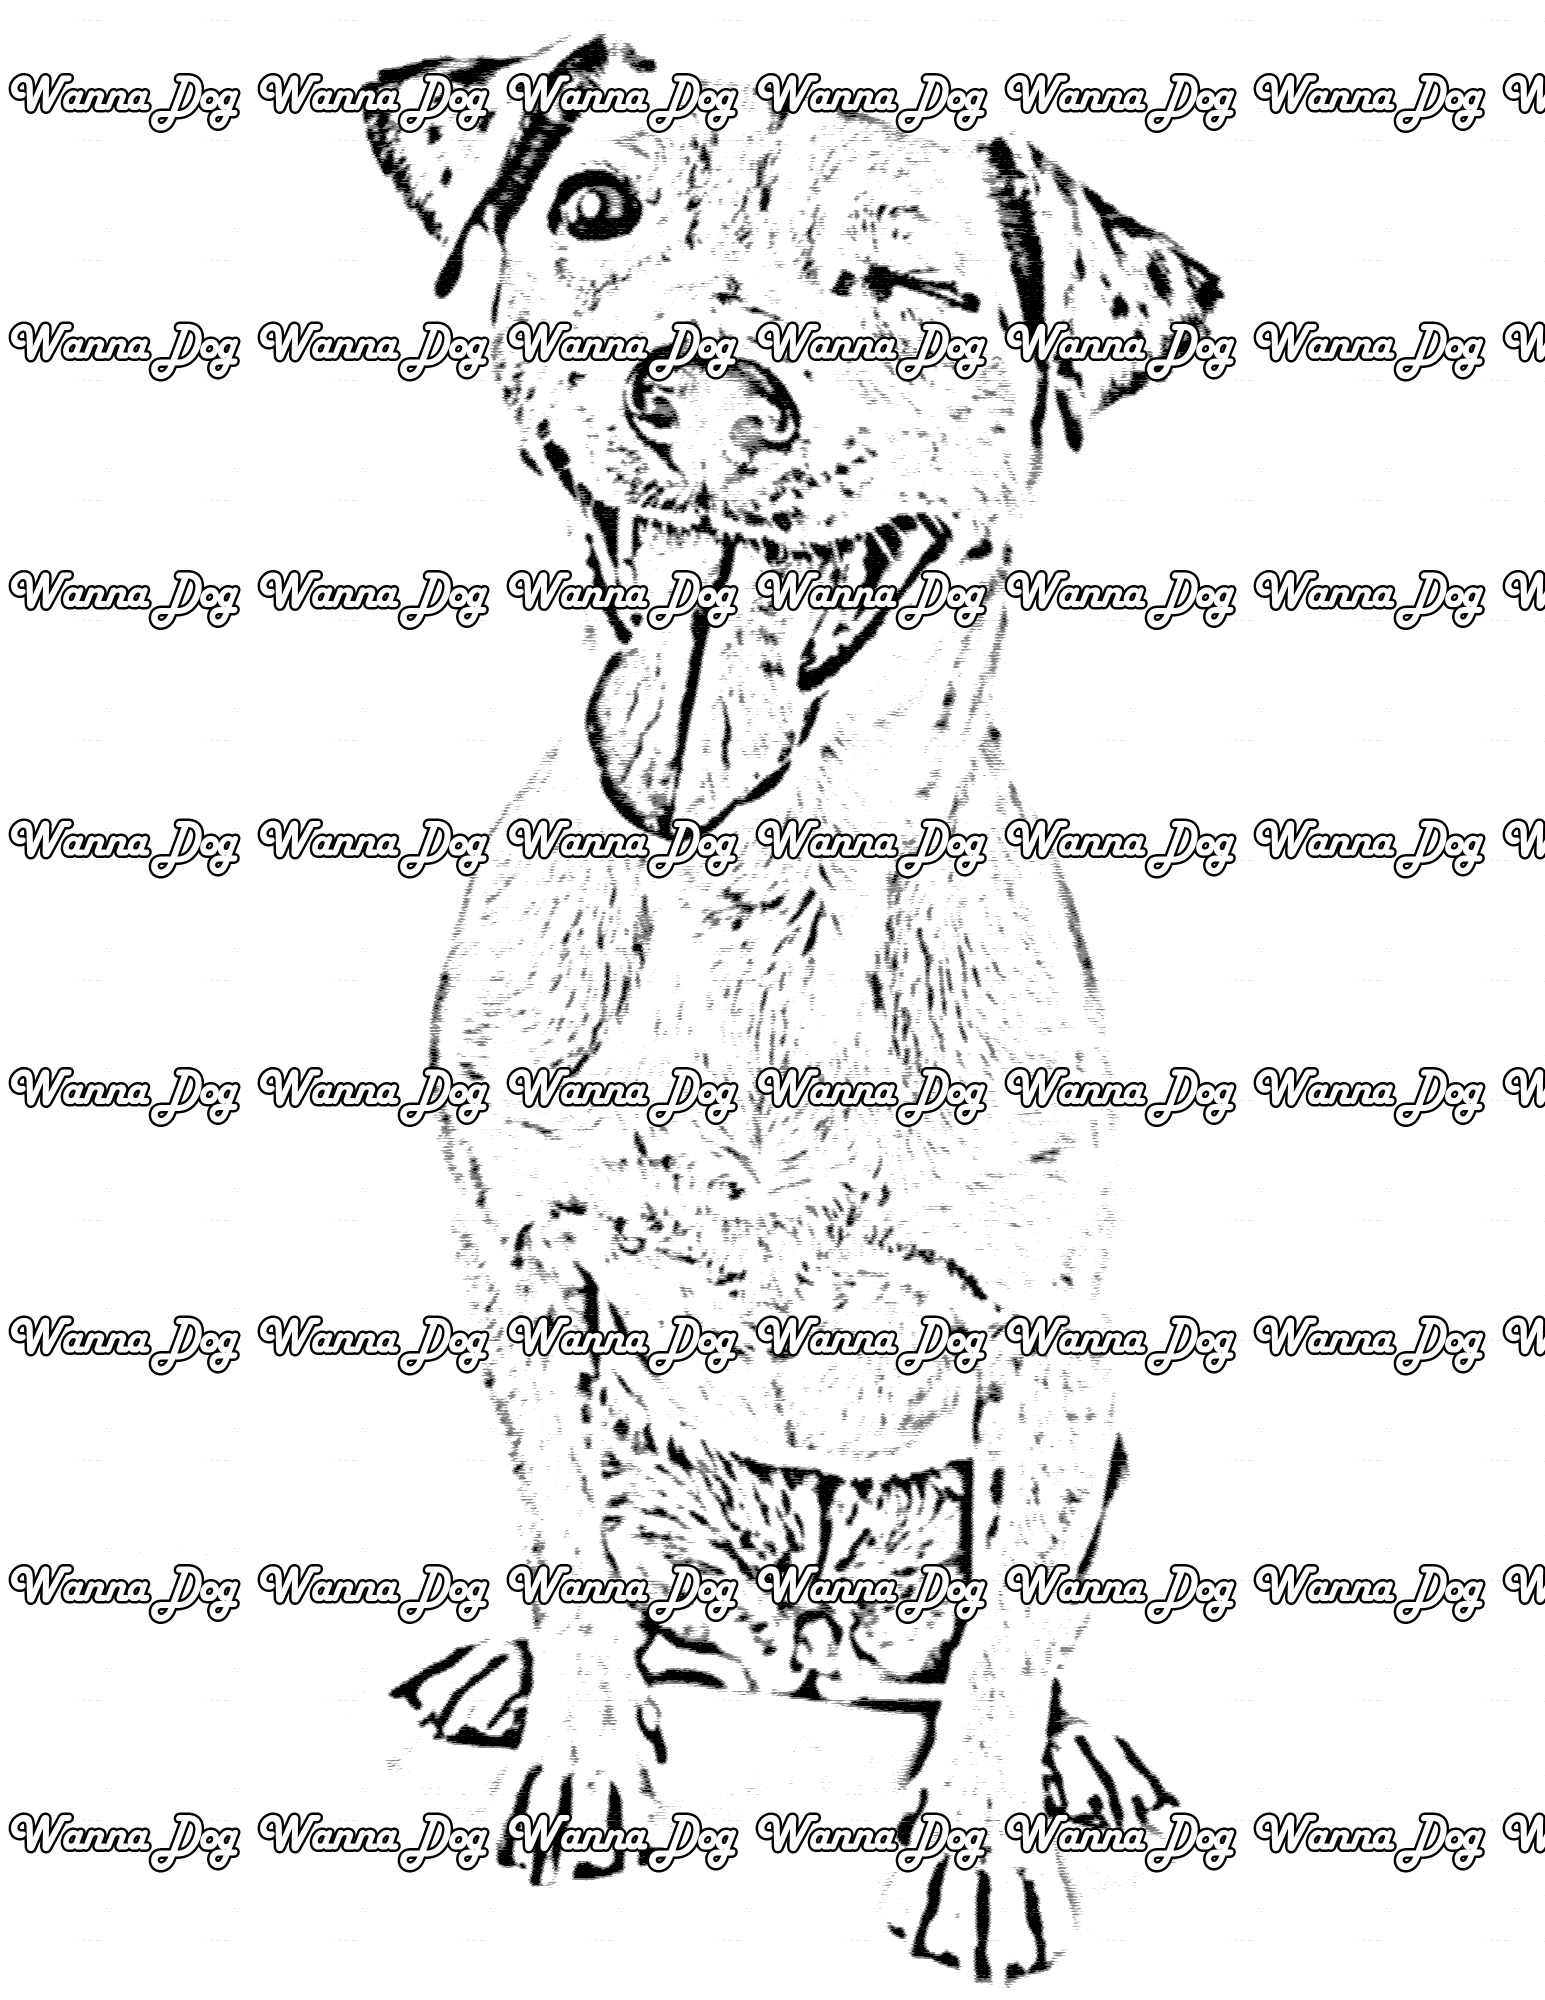 Jack Russell Terrier Coloring Page of a Jack Russell Terrier winking